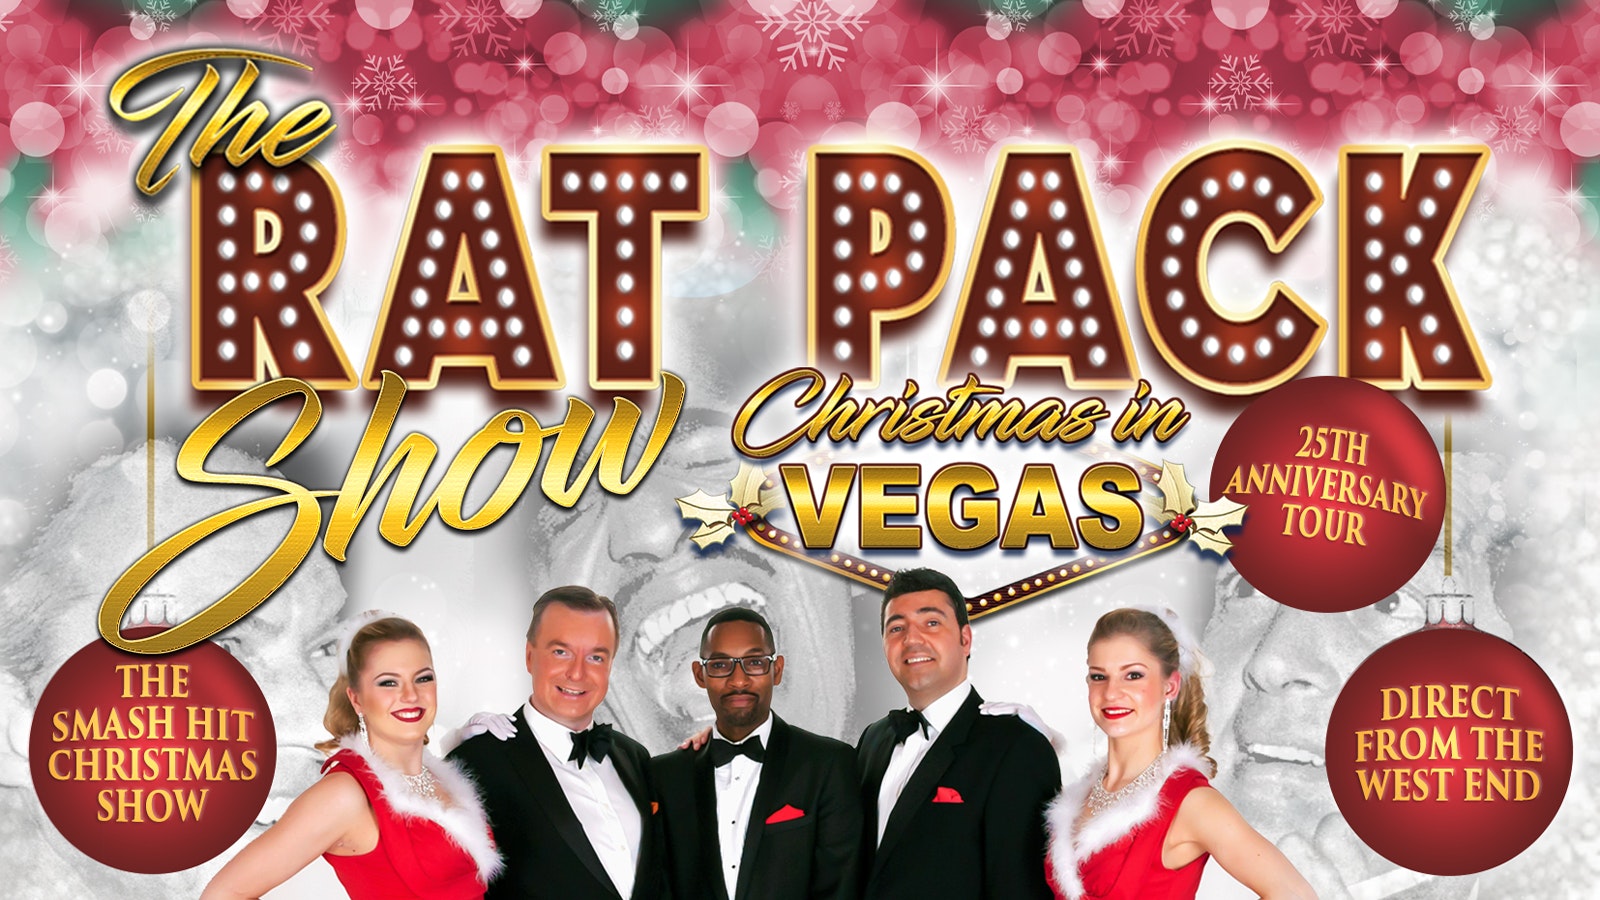 The Rat Pack Show – Christmas by Vegas- 25th Anniversary Tour